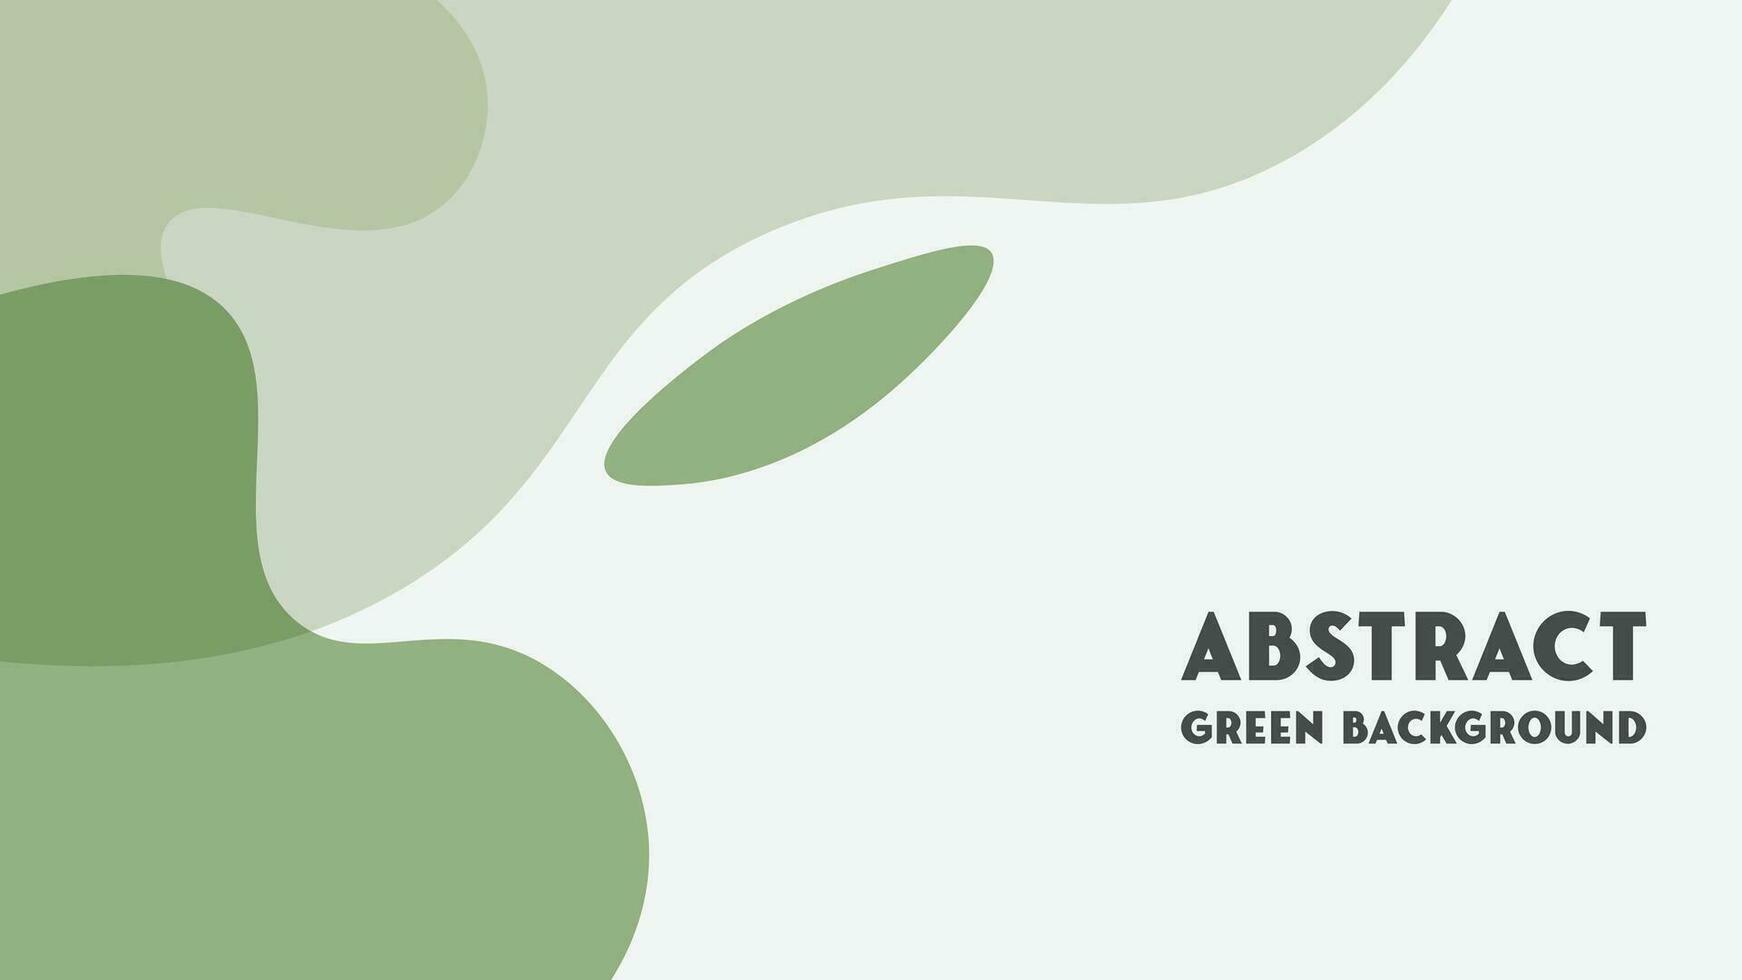 Abstract Background Green Organic Playful Minimalist vector